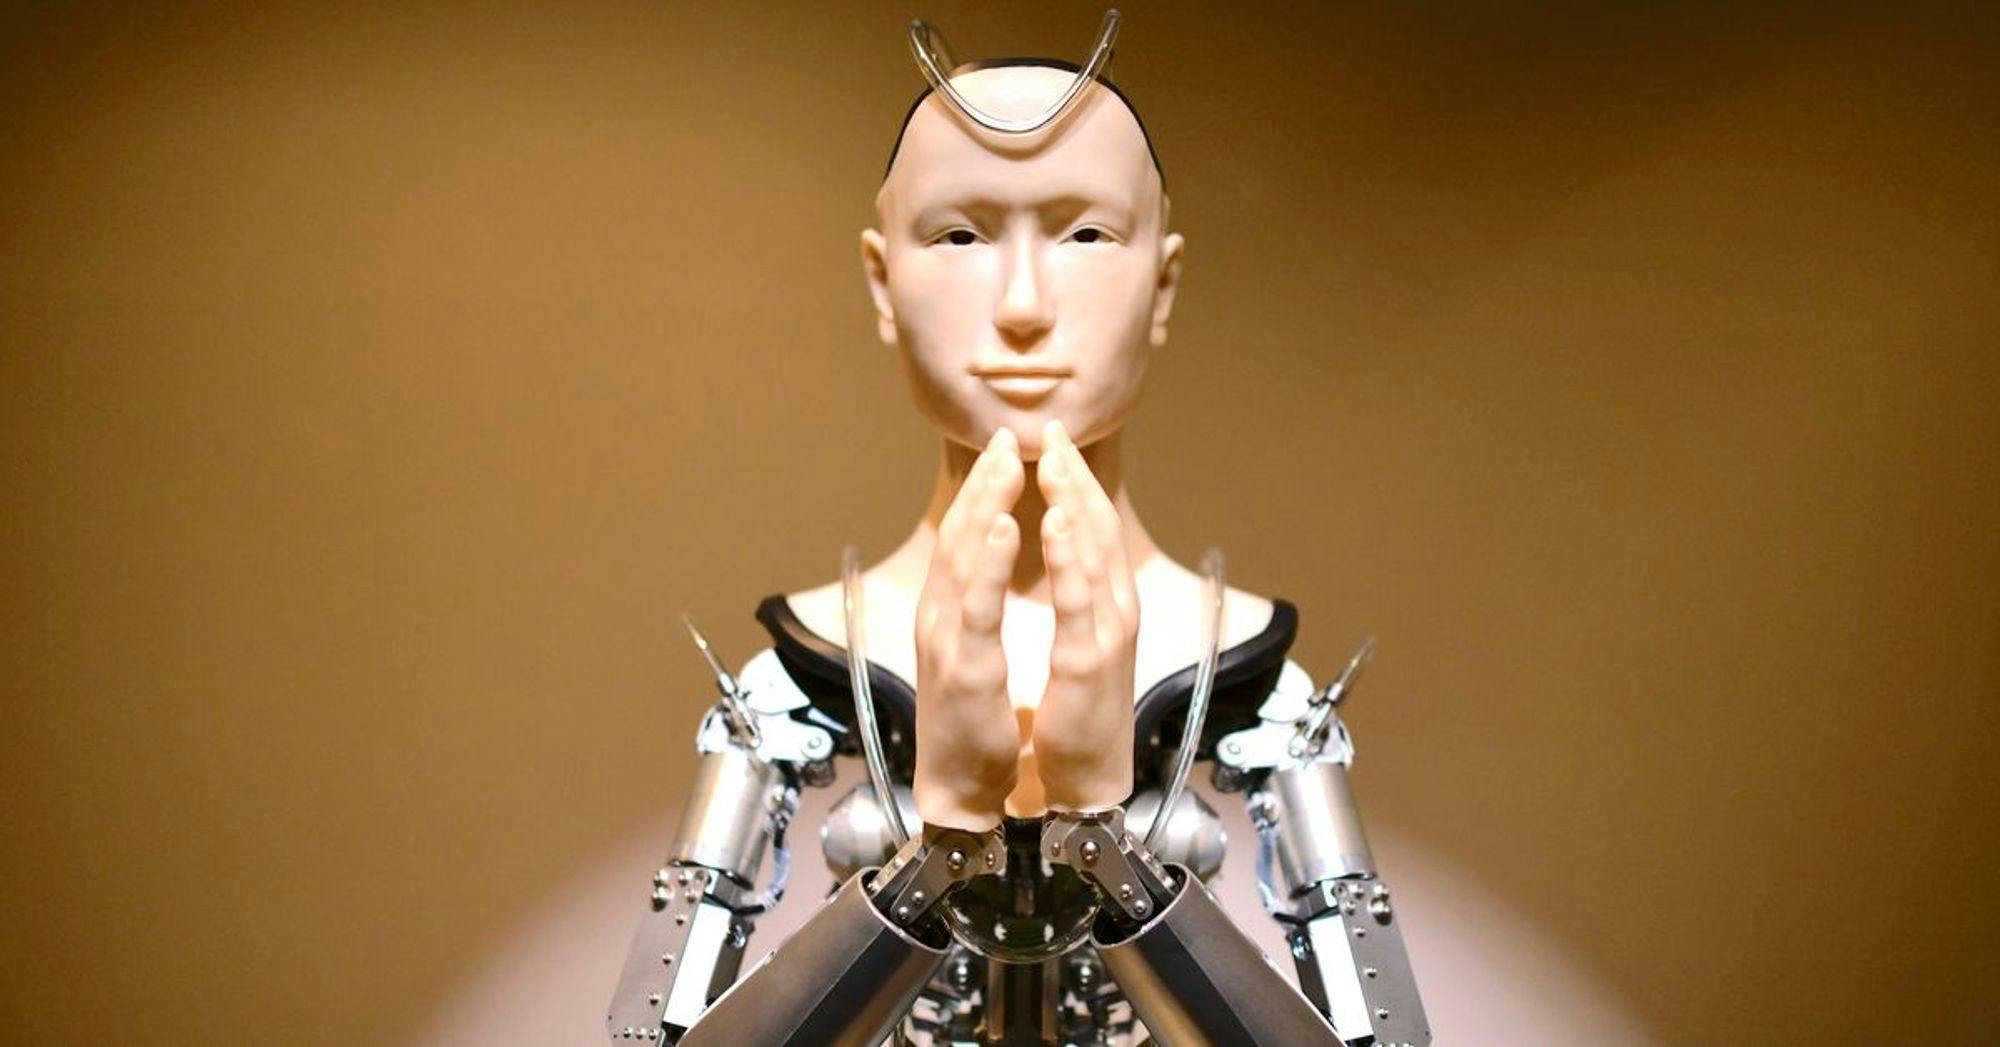 Robot priests can bless you, advise you, and even perform your funeral